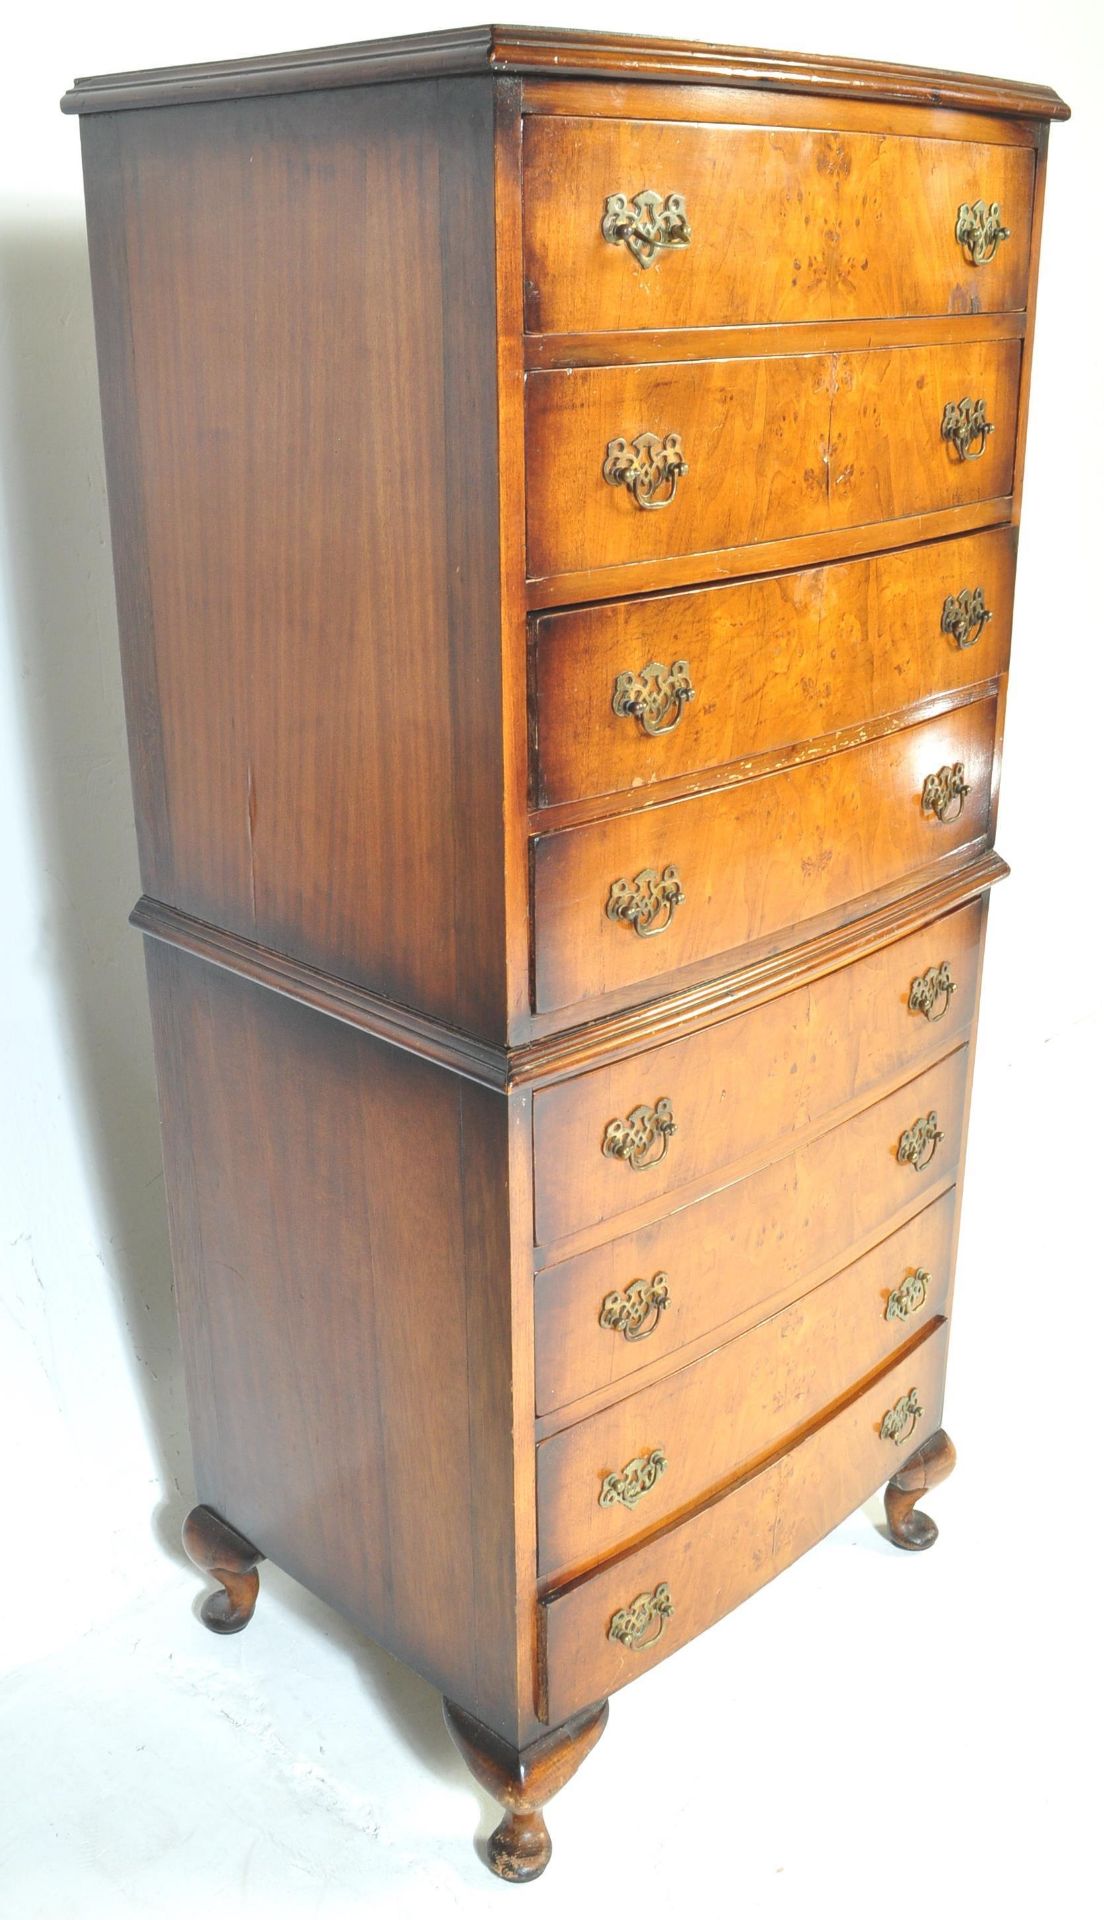 VINTAGE QUEEN ANNE REVIVAL ATTIC CHEST OF DRAWERS - Image 6 of 6